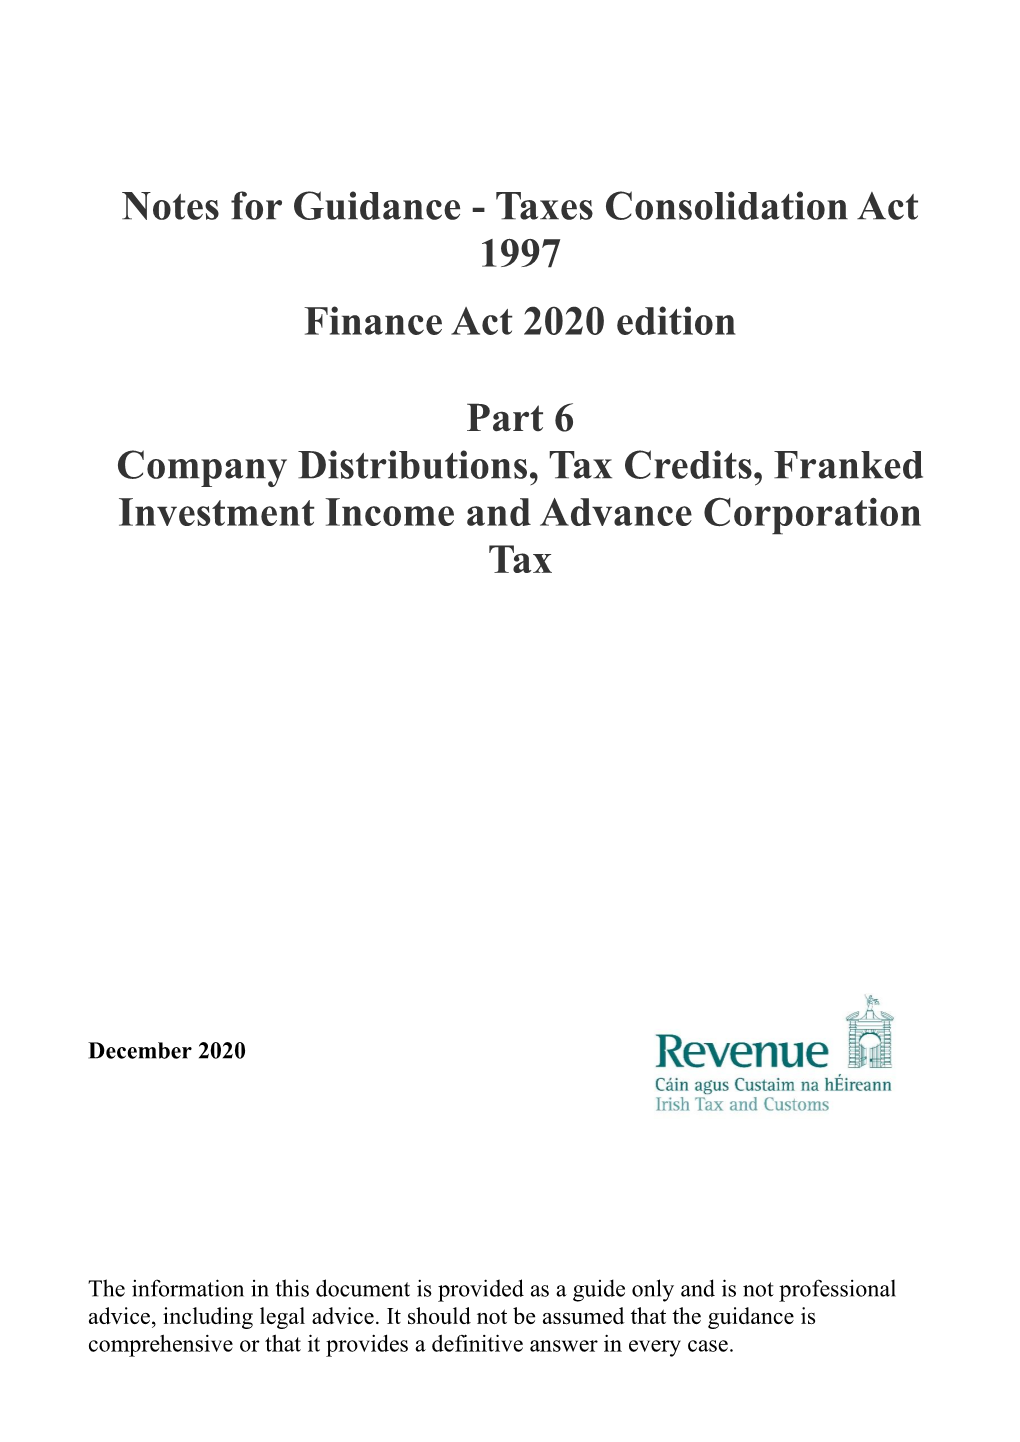 Part 6 Company Distributions, Tax Credits, Franked Investment Income and Advance Corporation Tax